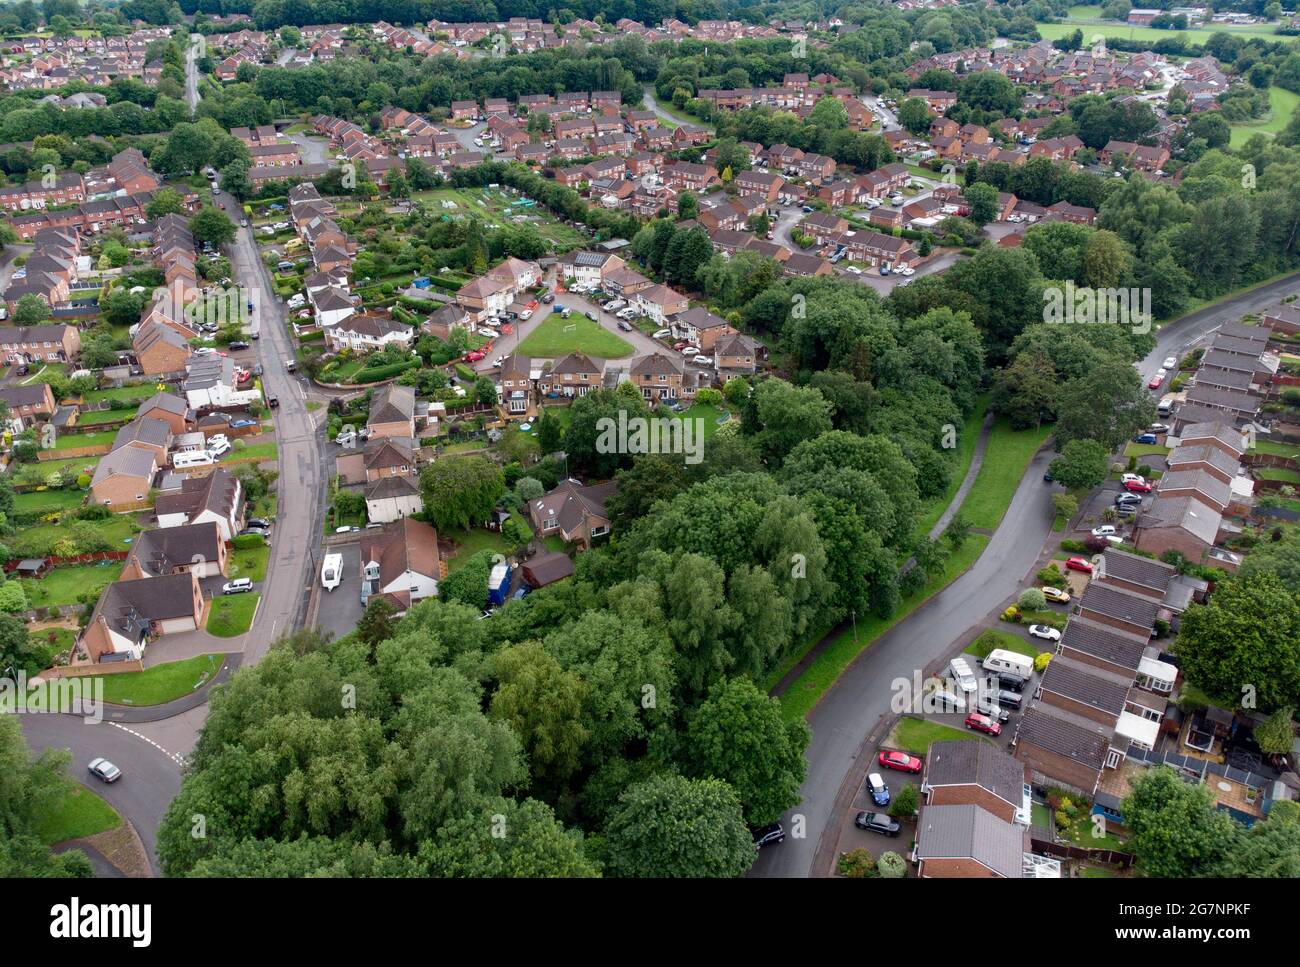 An aerial view of  homes in Redditch, Worcestershire, England showing streets and houses.  Image taken by CAA qualified drone pilot. Stock Photo